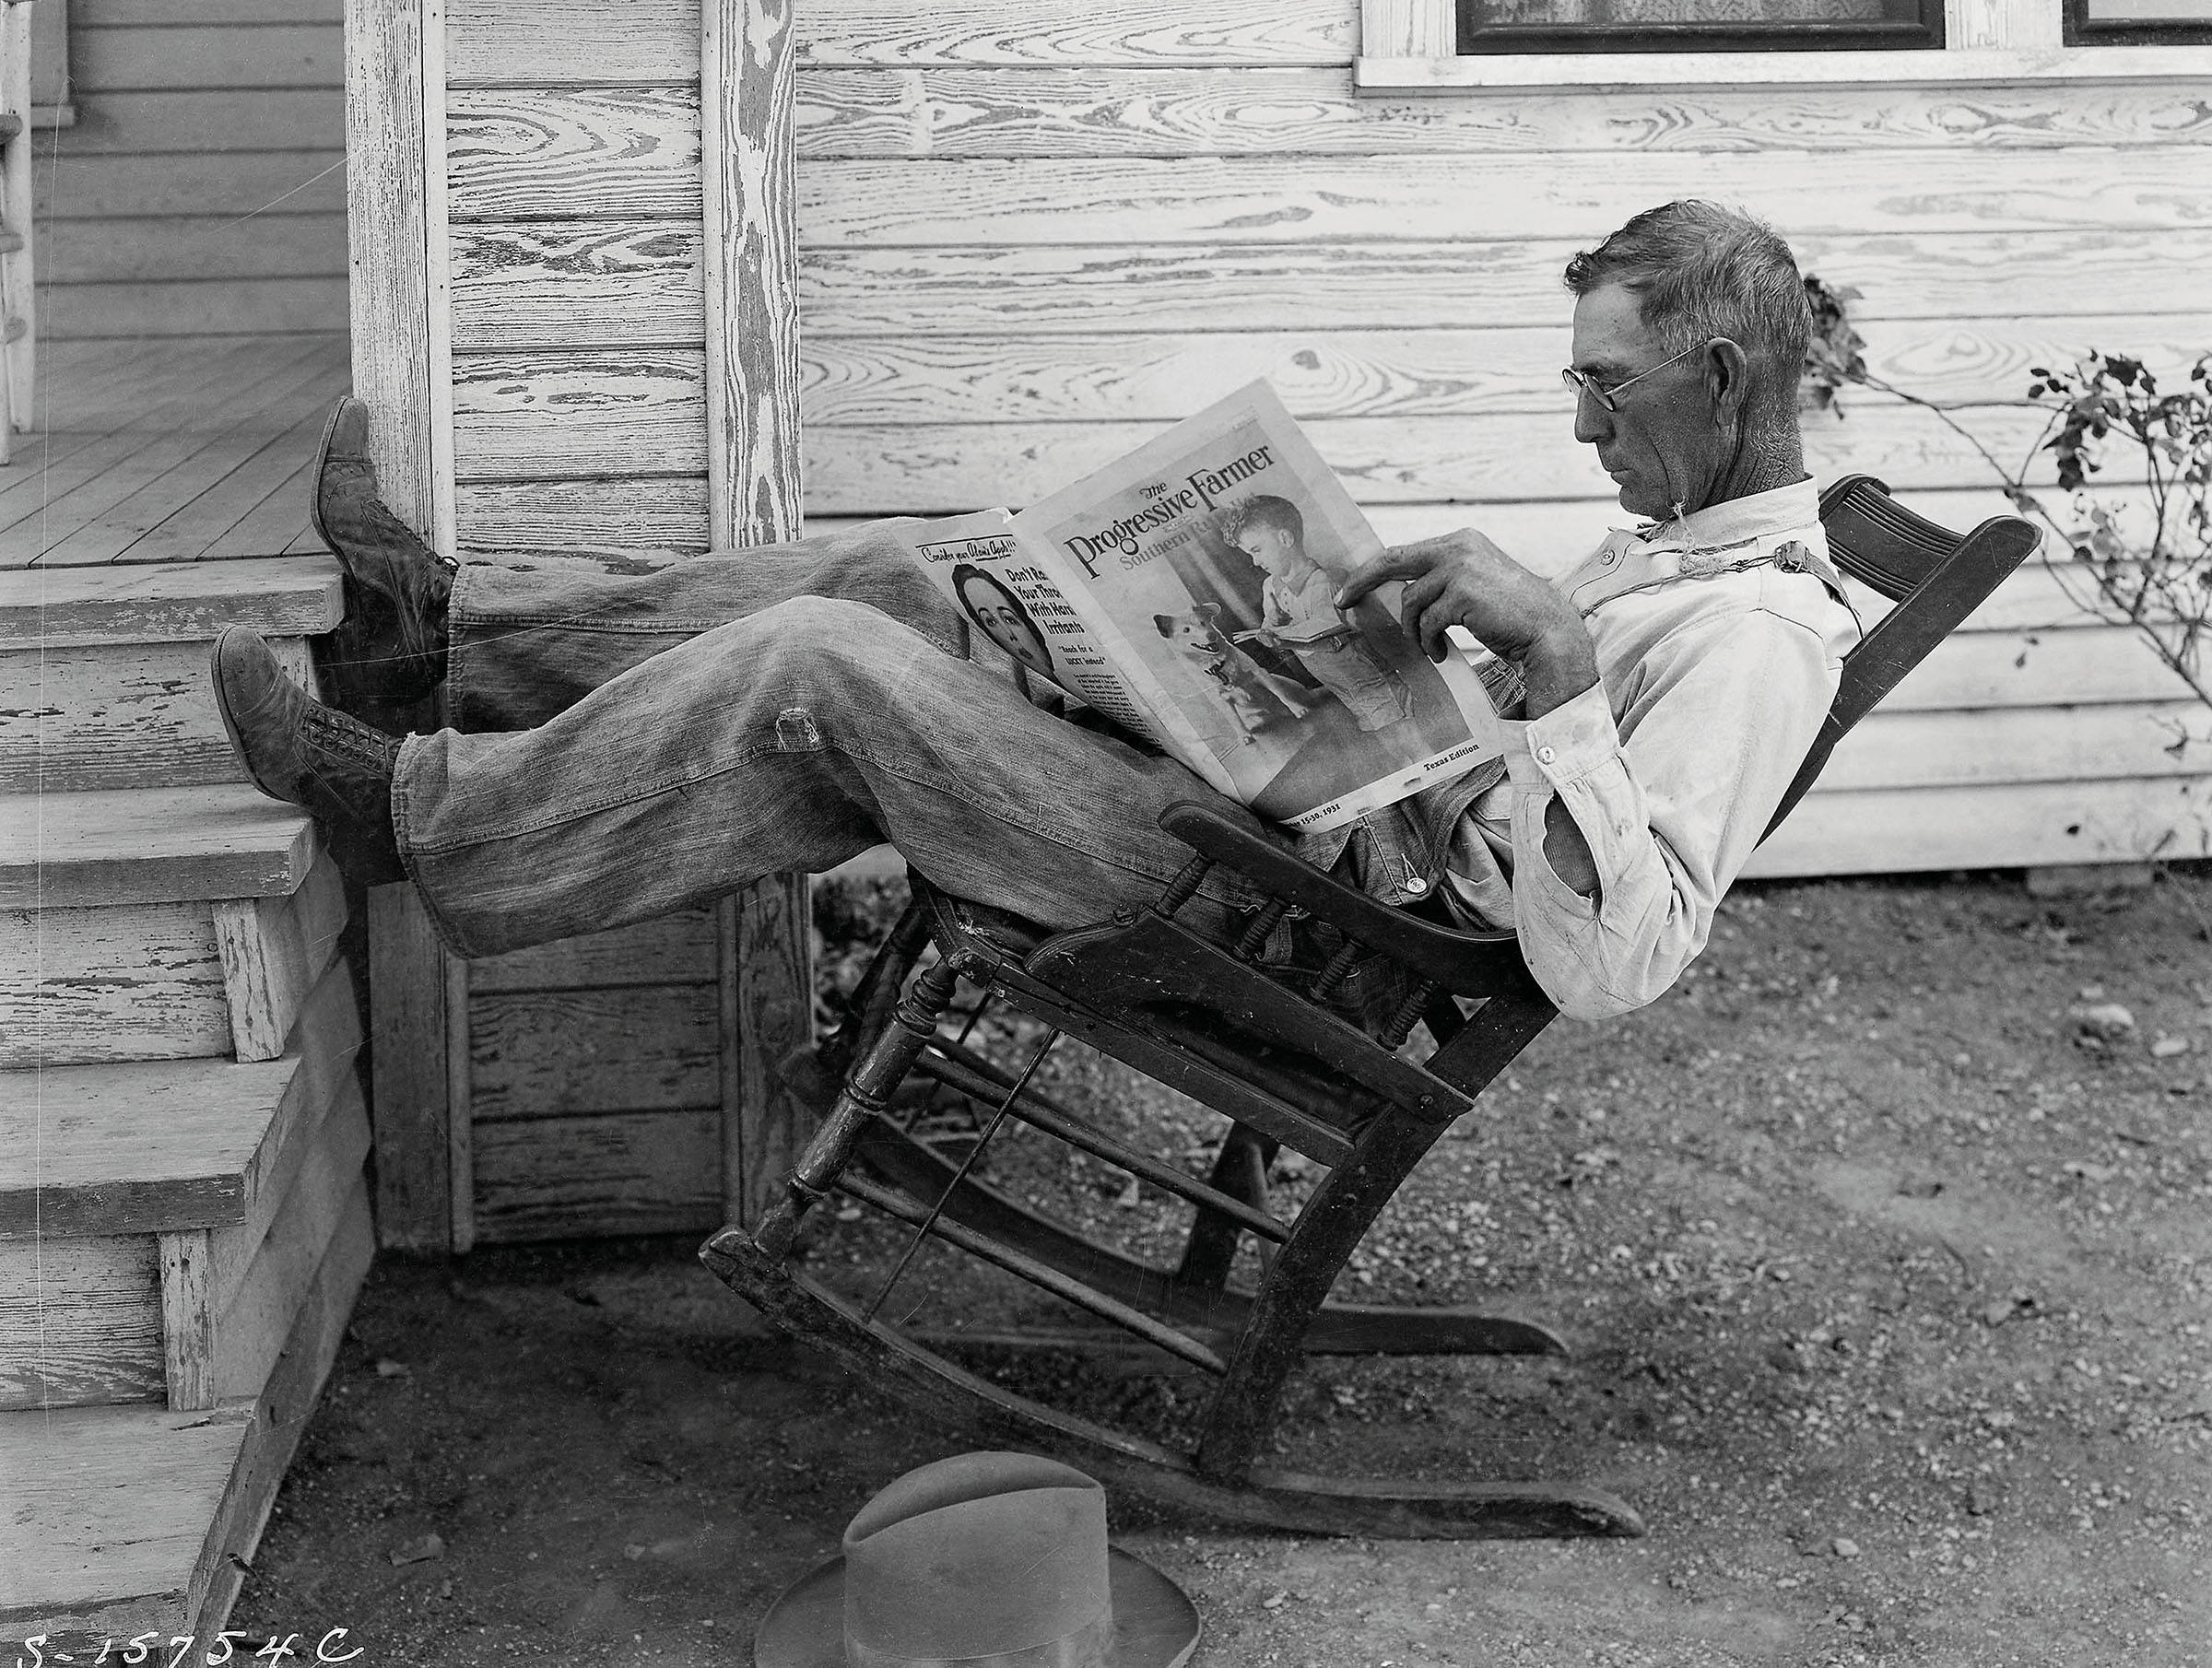 A man leans back in a rocking chair while reading a newspaper in this historic photo